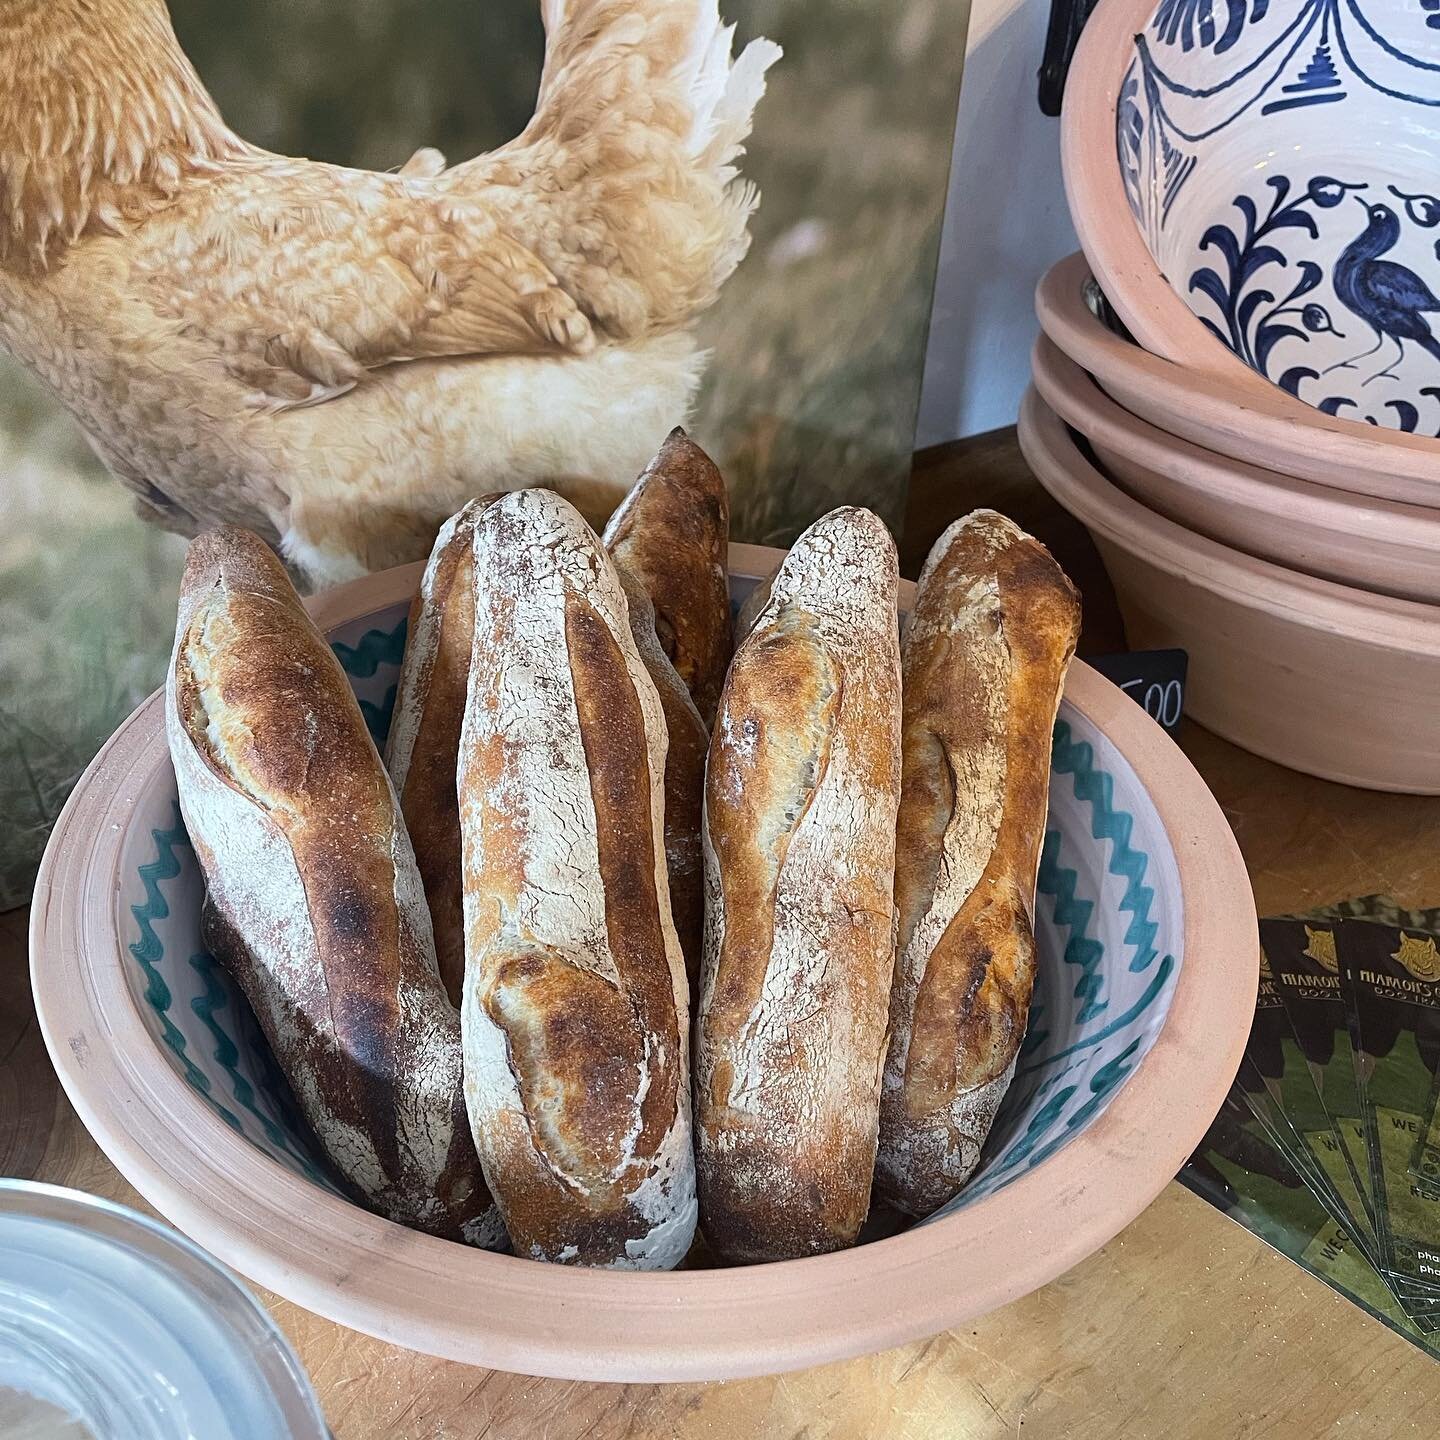 What a perfect way to display our beautiful baguettes 🥰
#baguette #sourdough #sourdoughbaguette #bowl #saladbowl #breadbowl #sourdoughbread #bakery #sourdoughbakery #greatbread #cotswolds #cotswoldlife #bread #lechlade #lechladeonthames